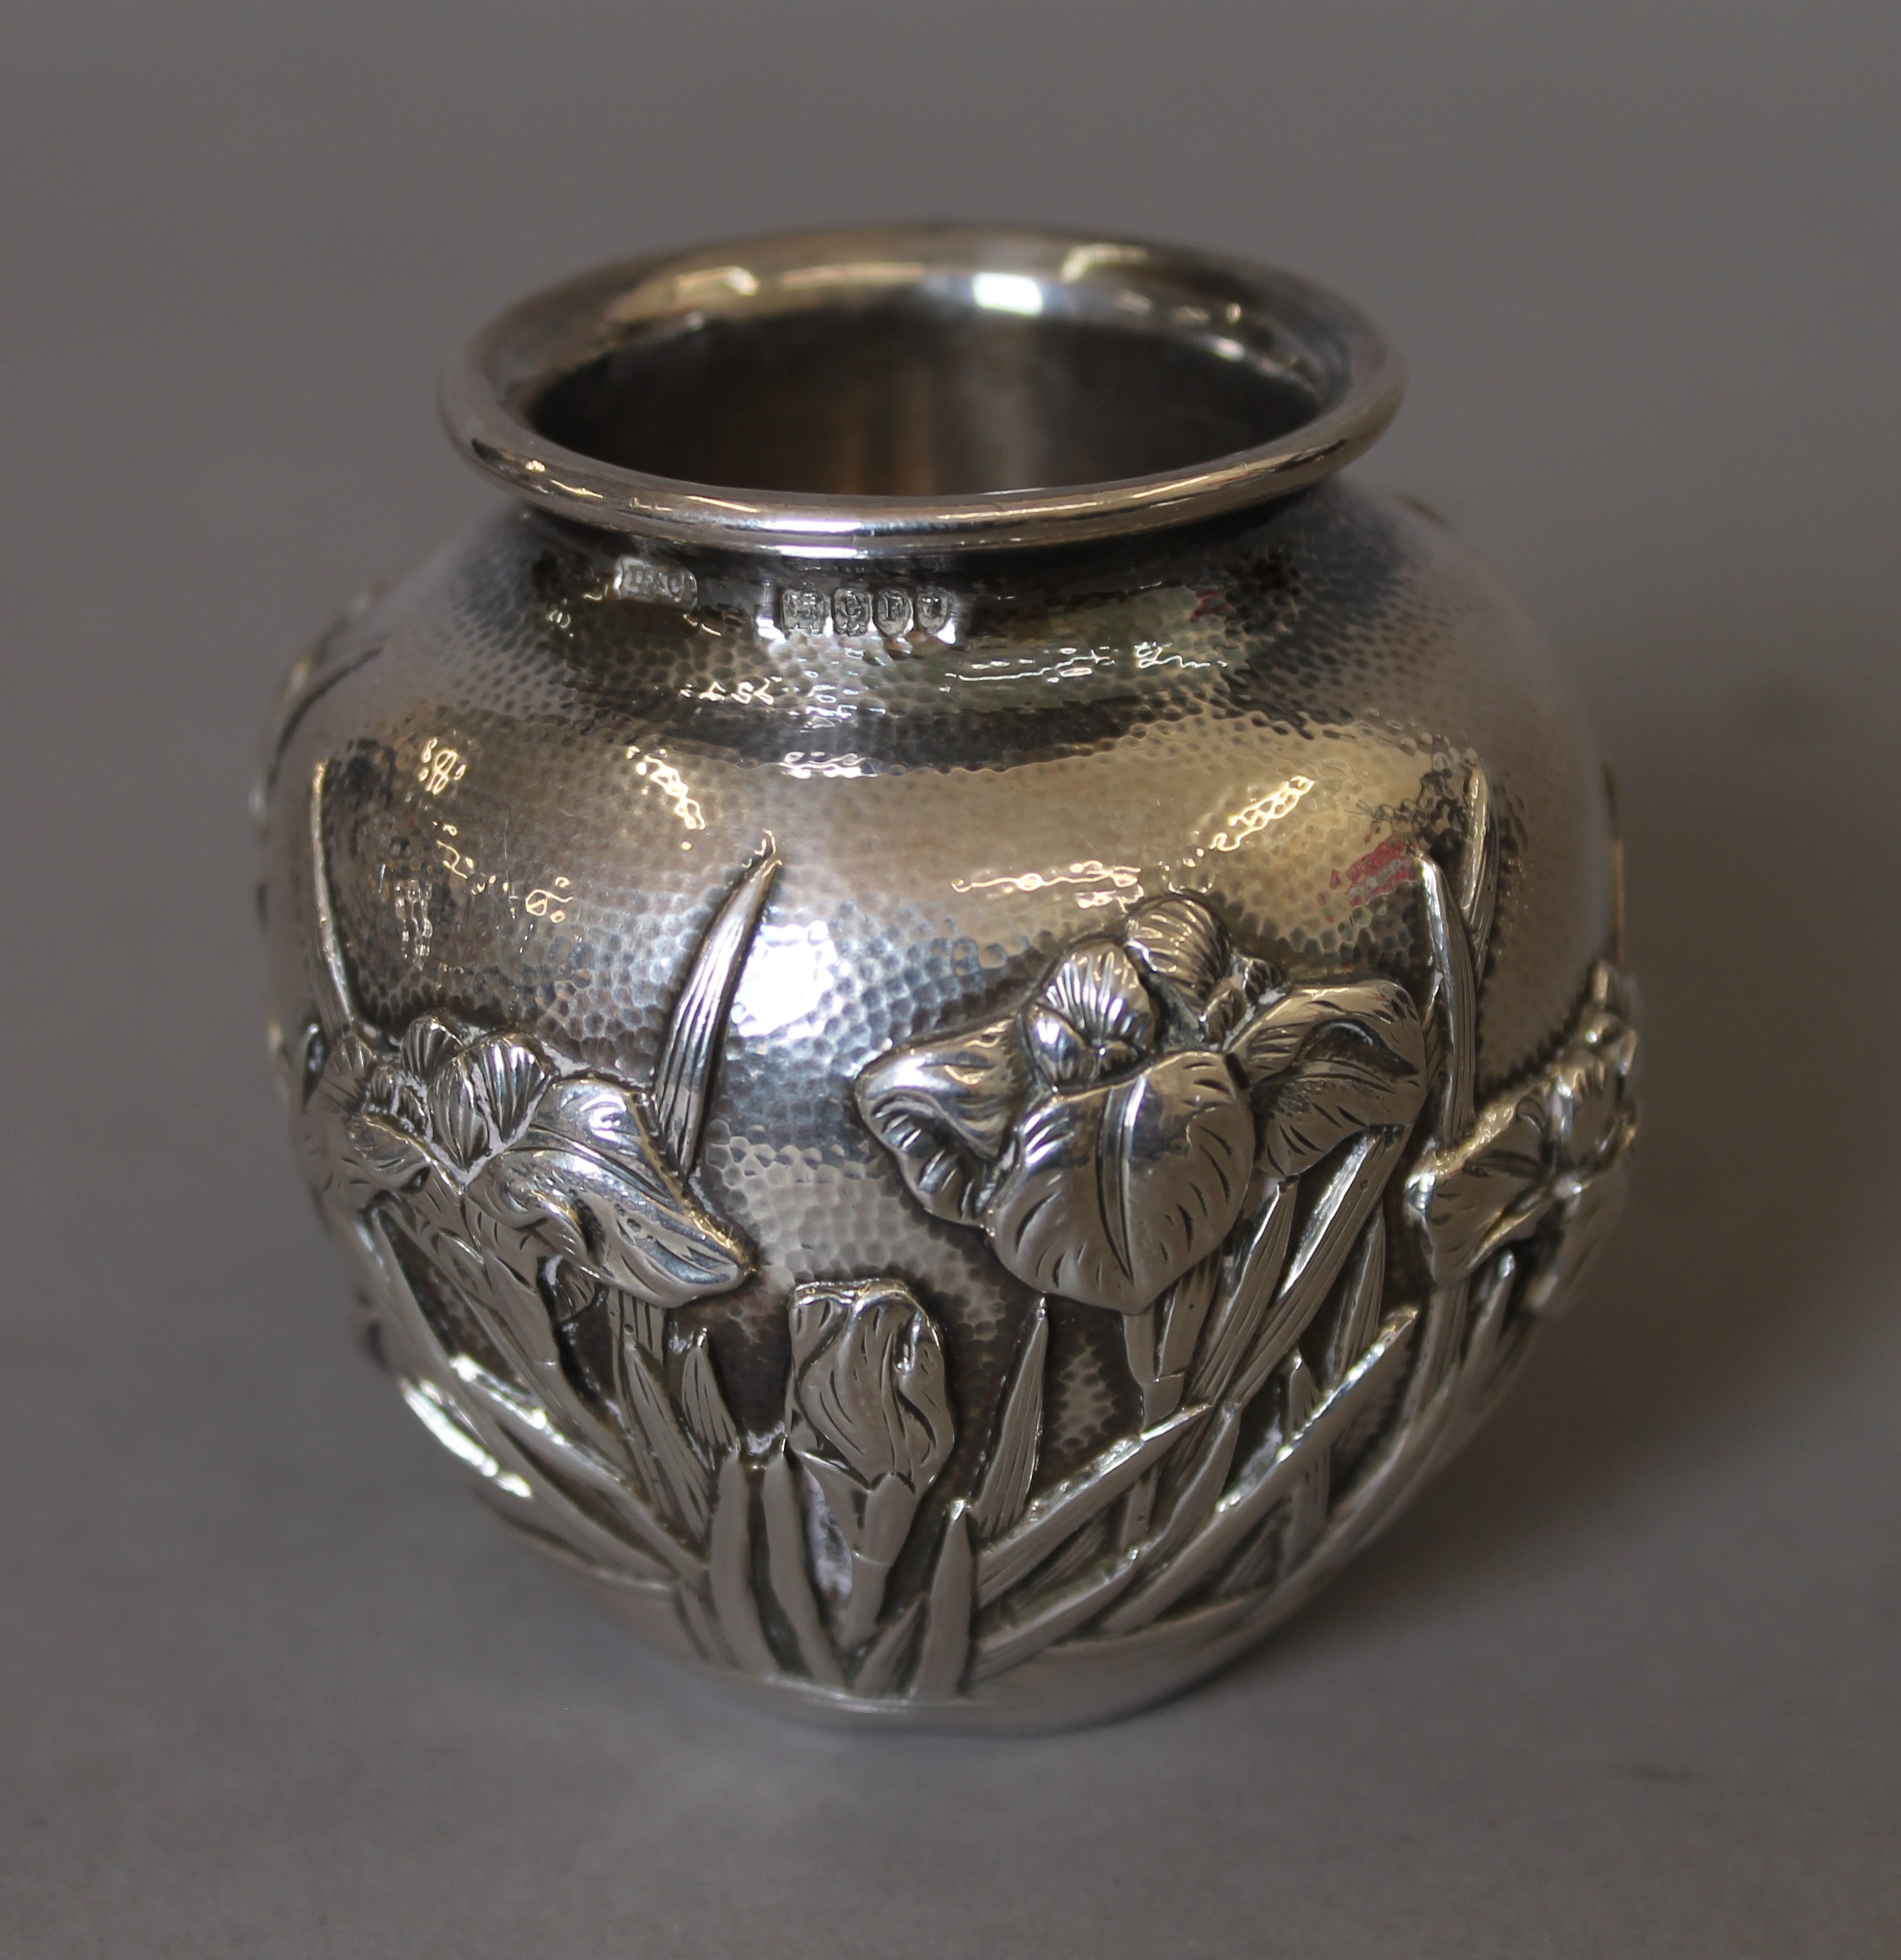 A pair of Japanese embossed silver vases, with Liberty & Co import marks. Each 6.5 cm high. 247. - Image 2 of 5